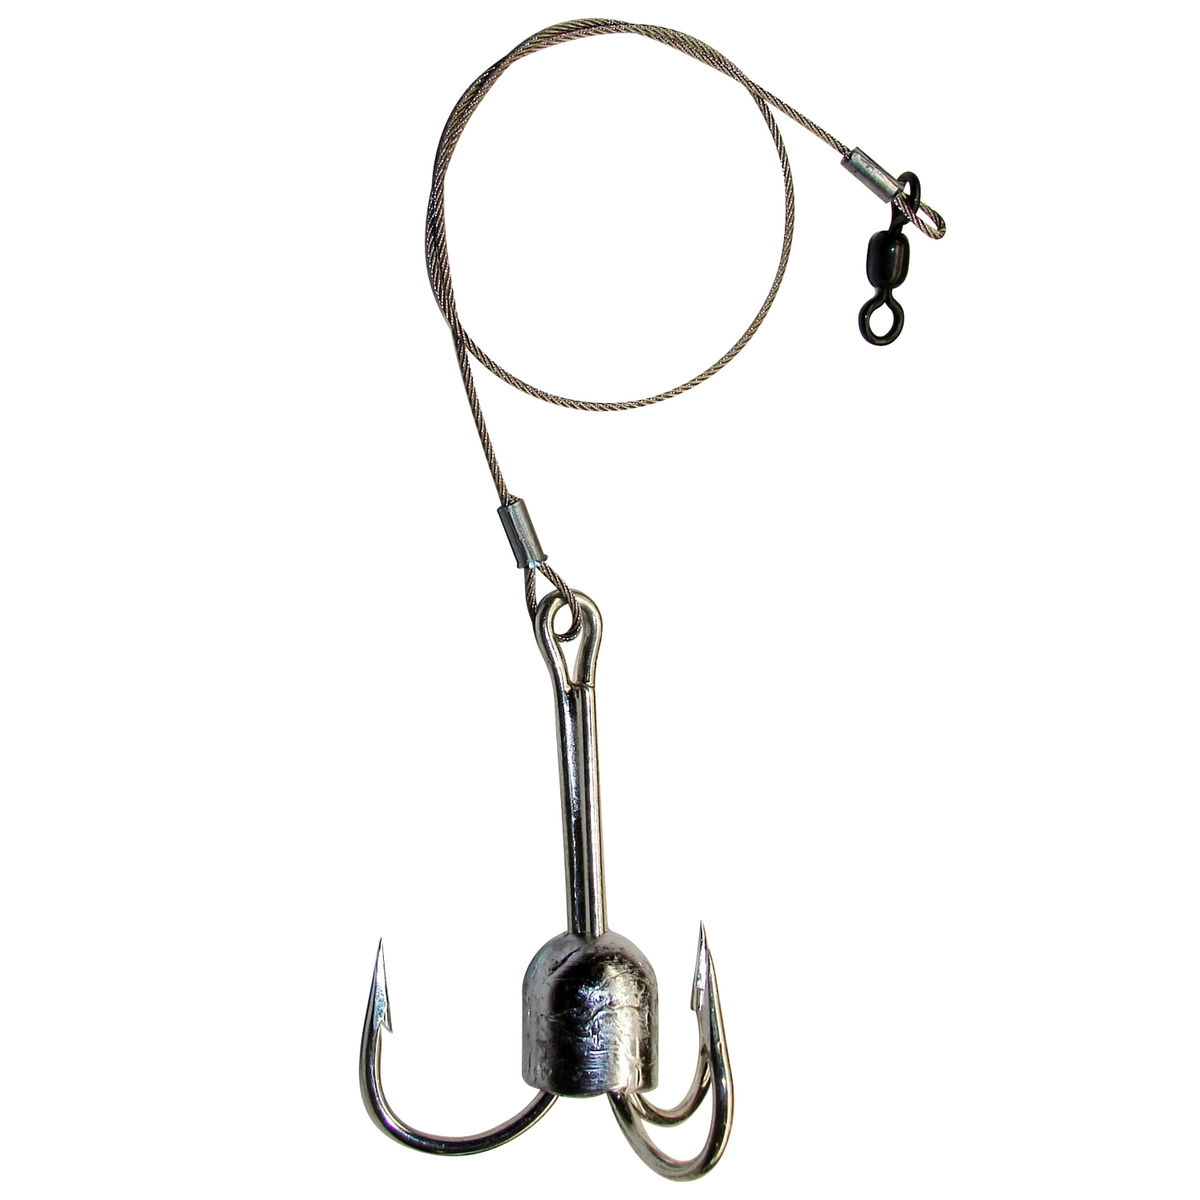  Mustad Snelled Central Draught Hook Fishing Terminal